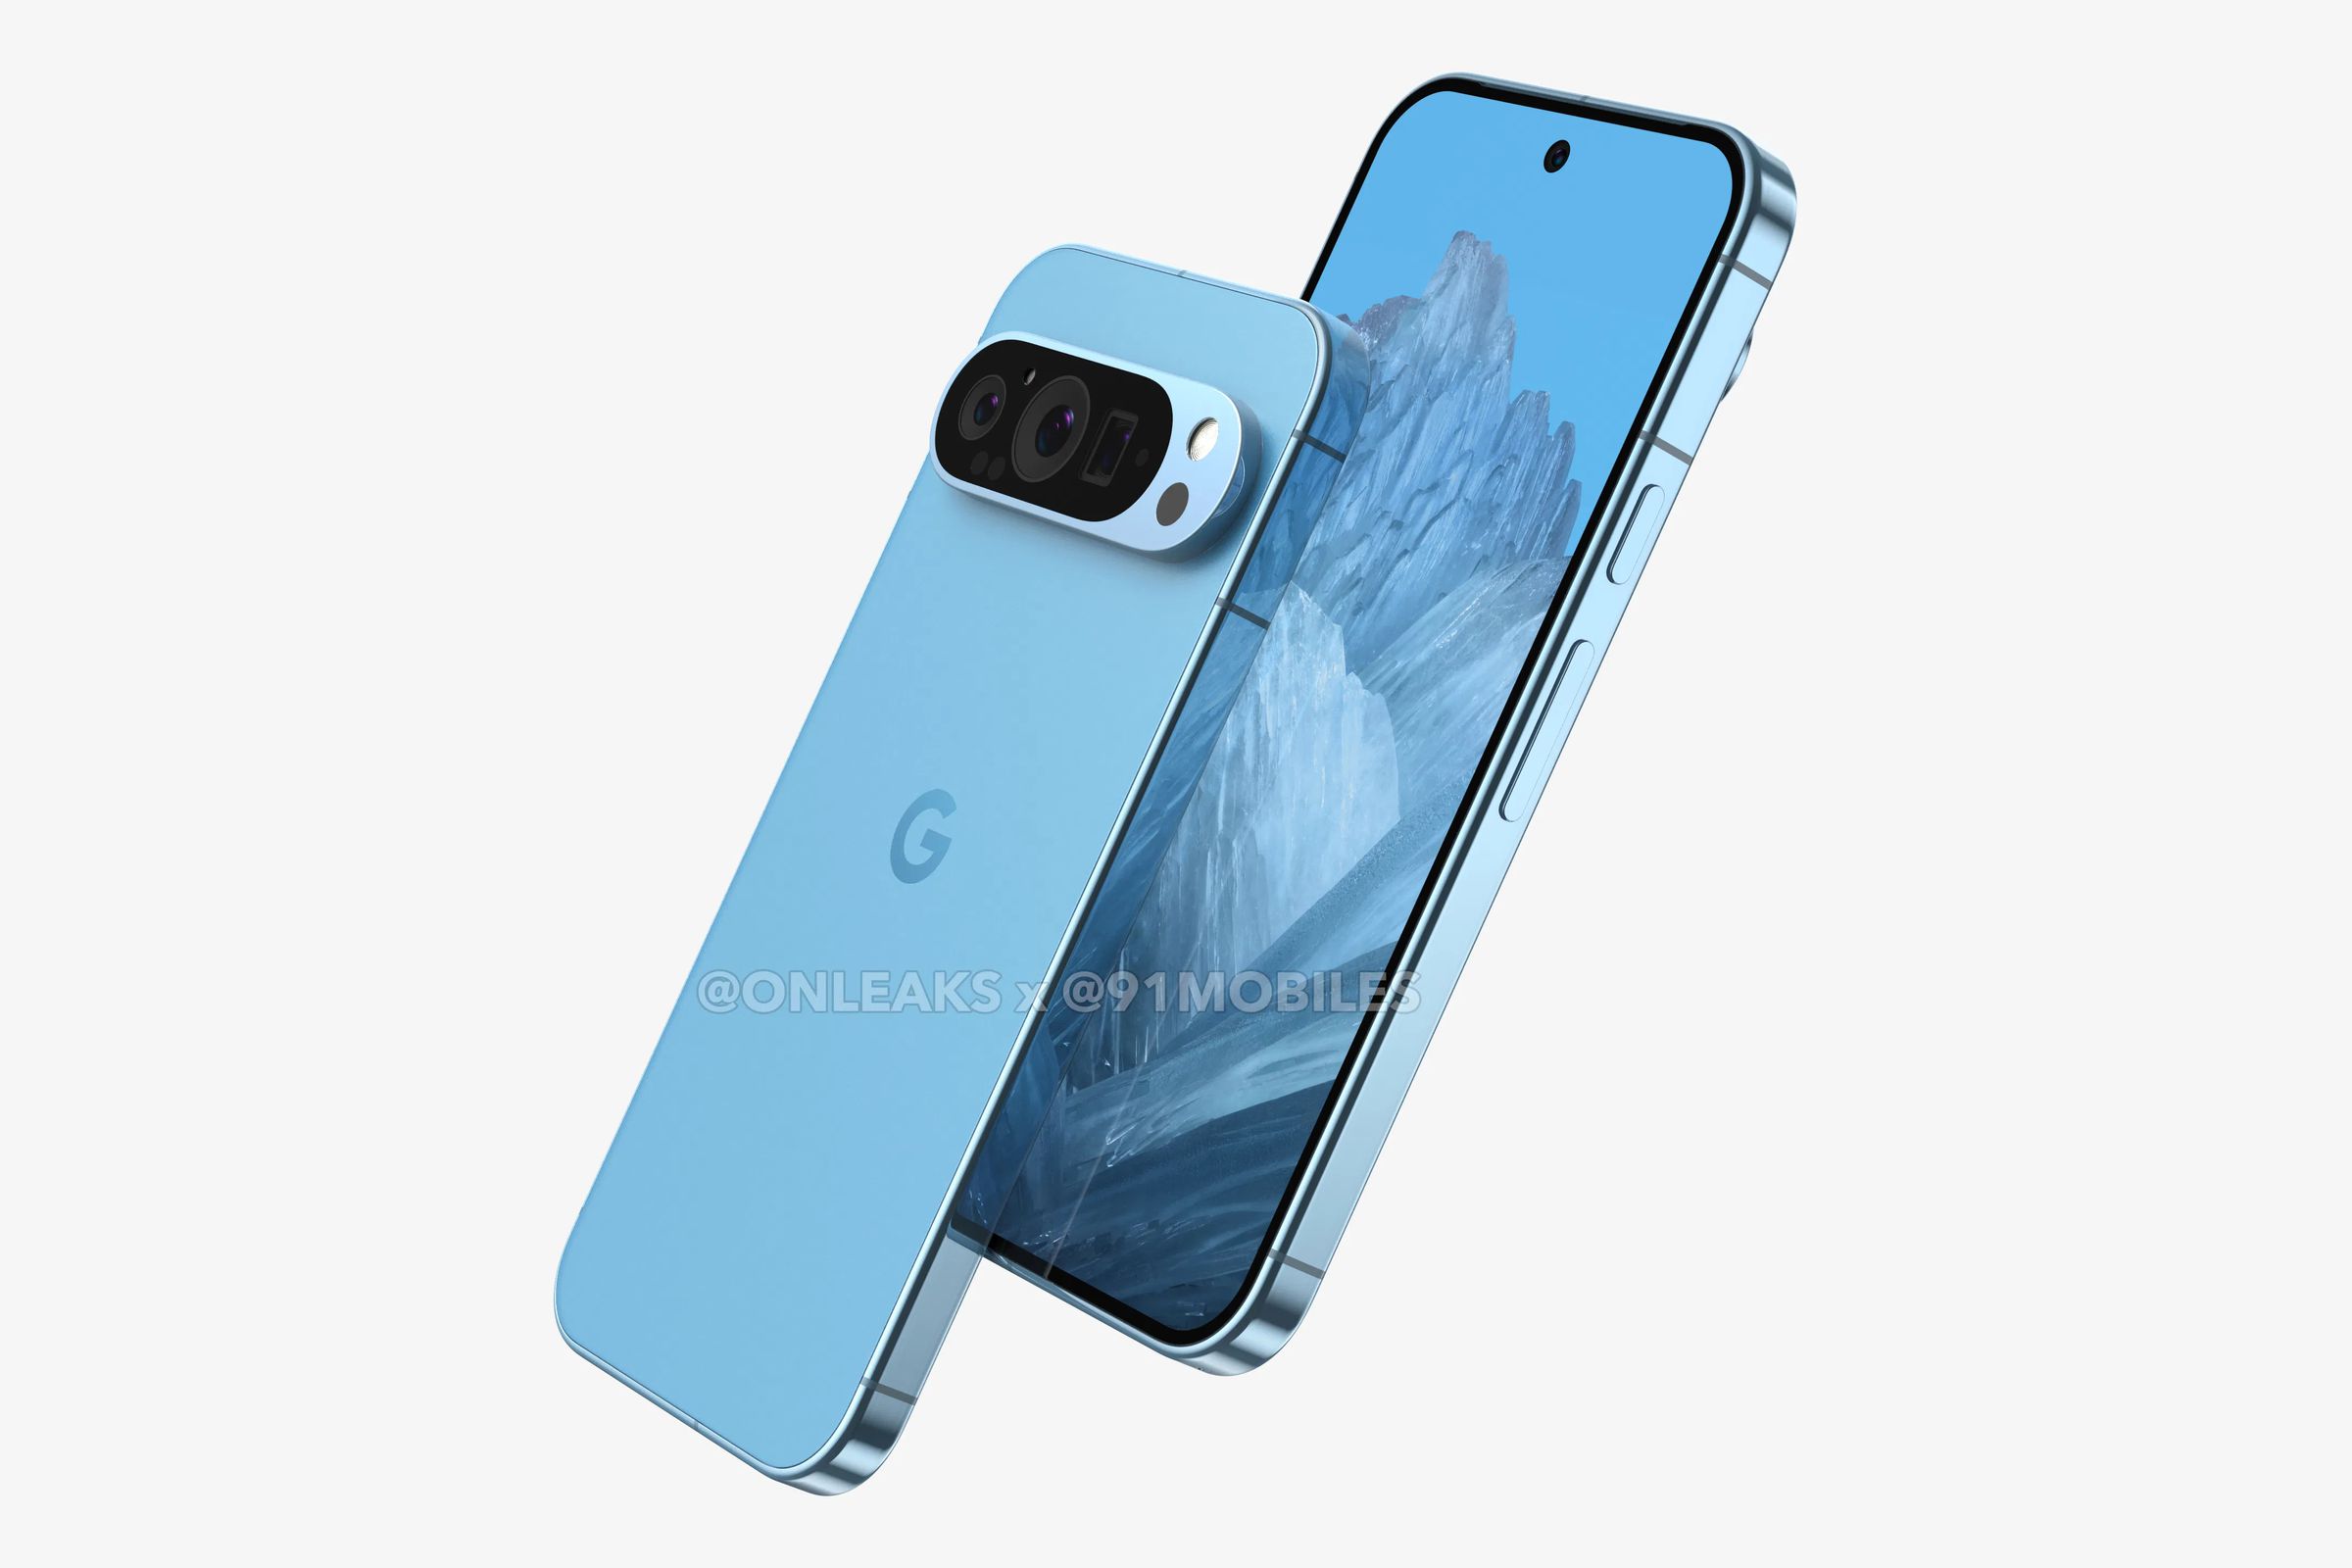 A leaked image showing what appears to be the Google Pixel 9 Pro